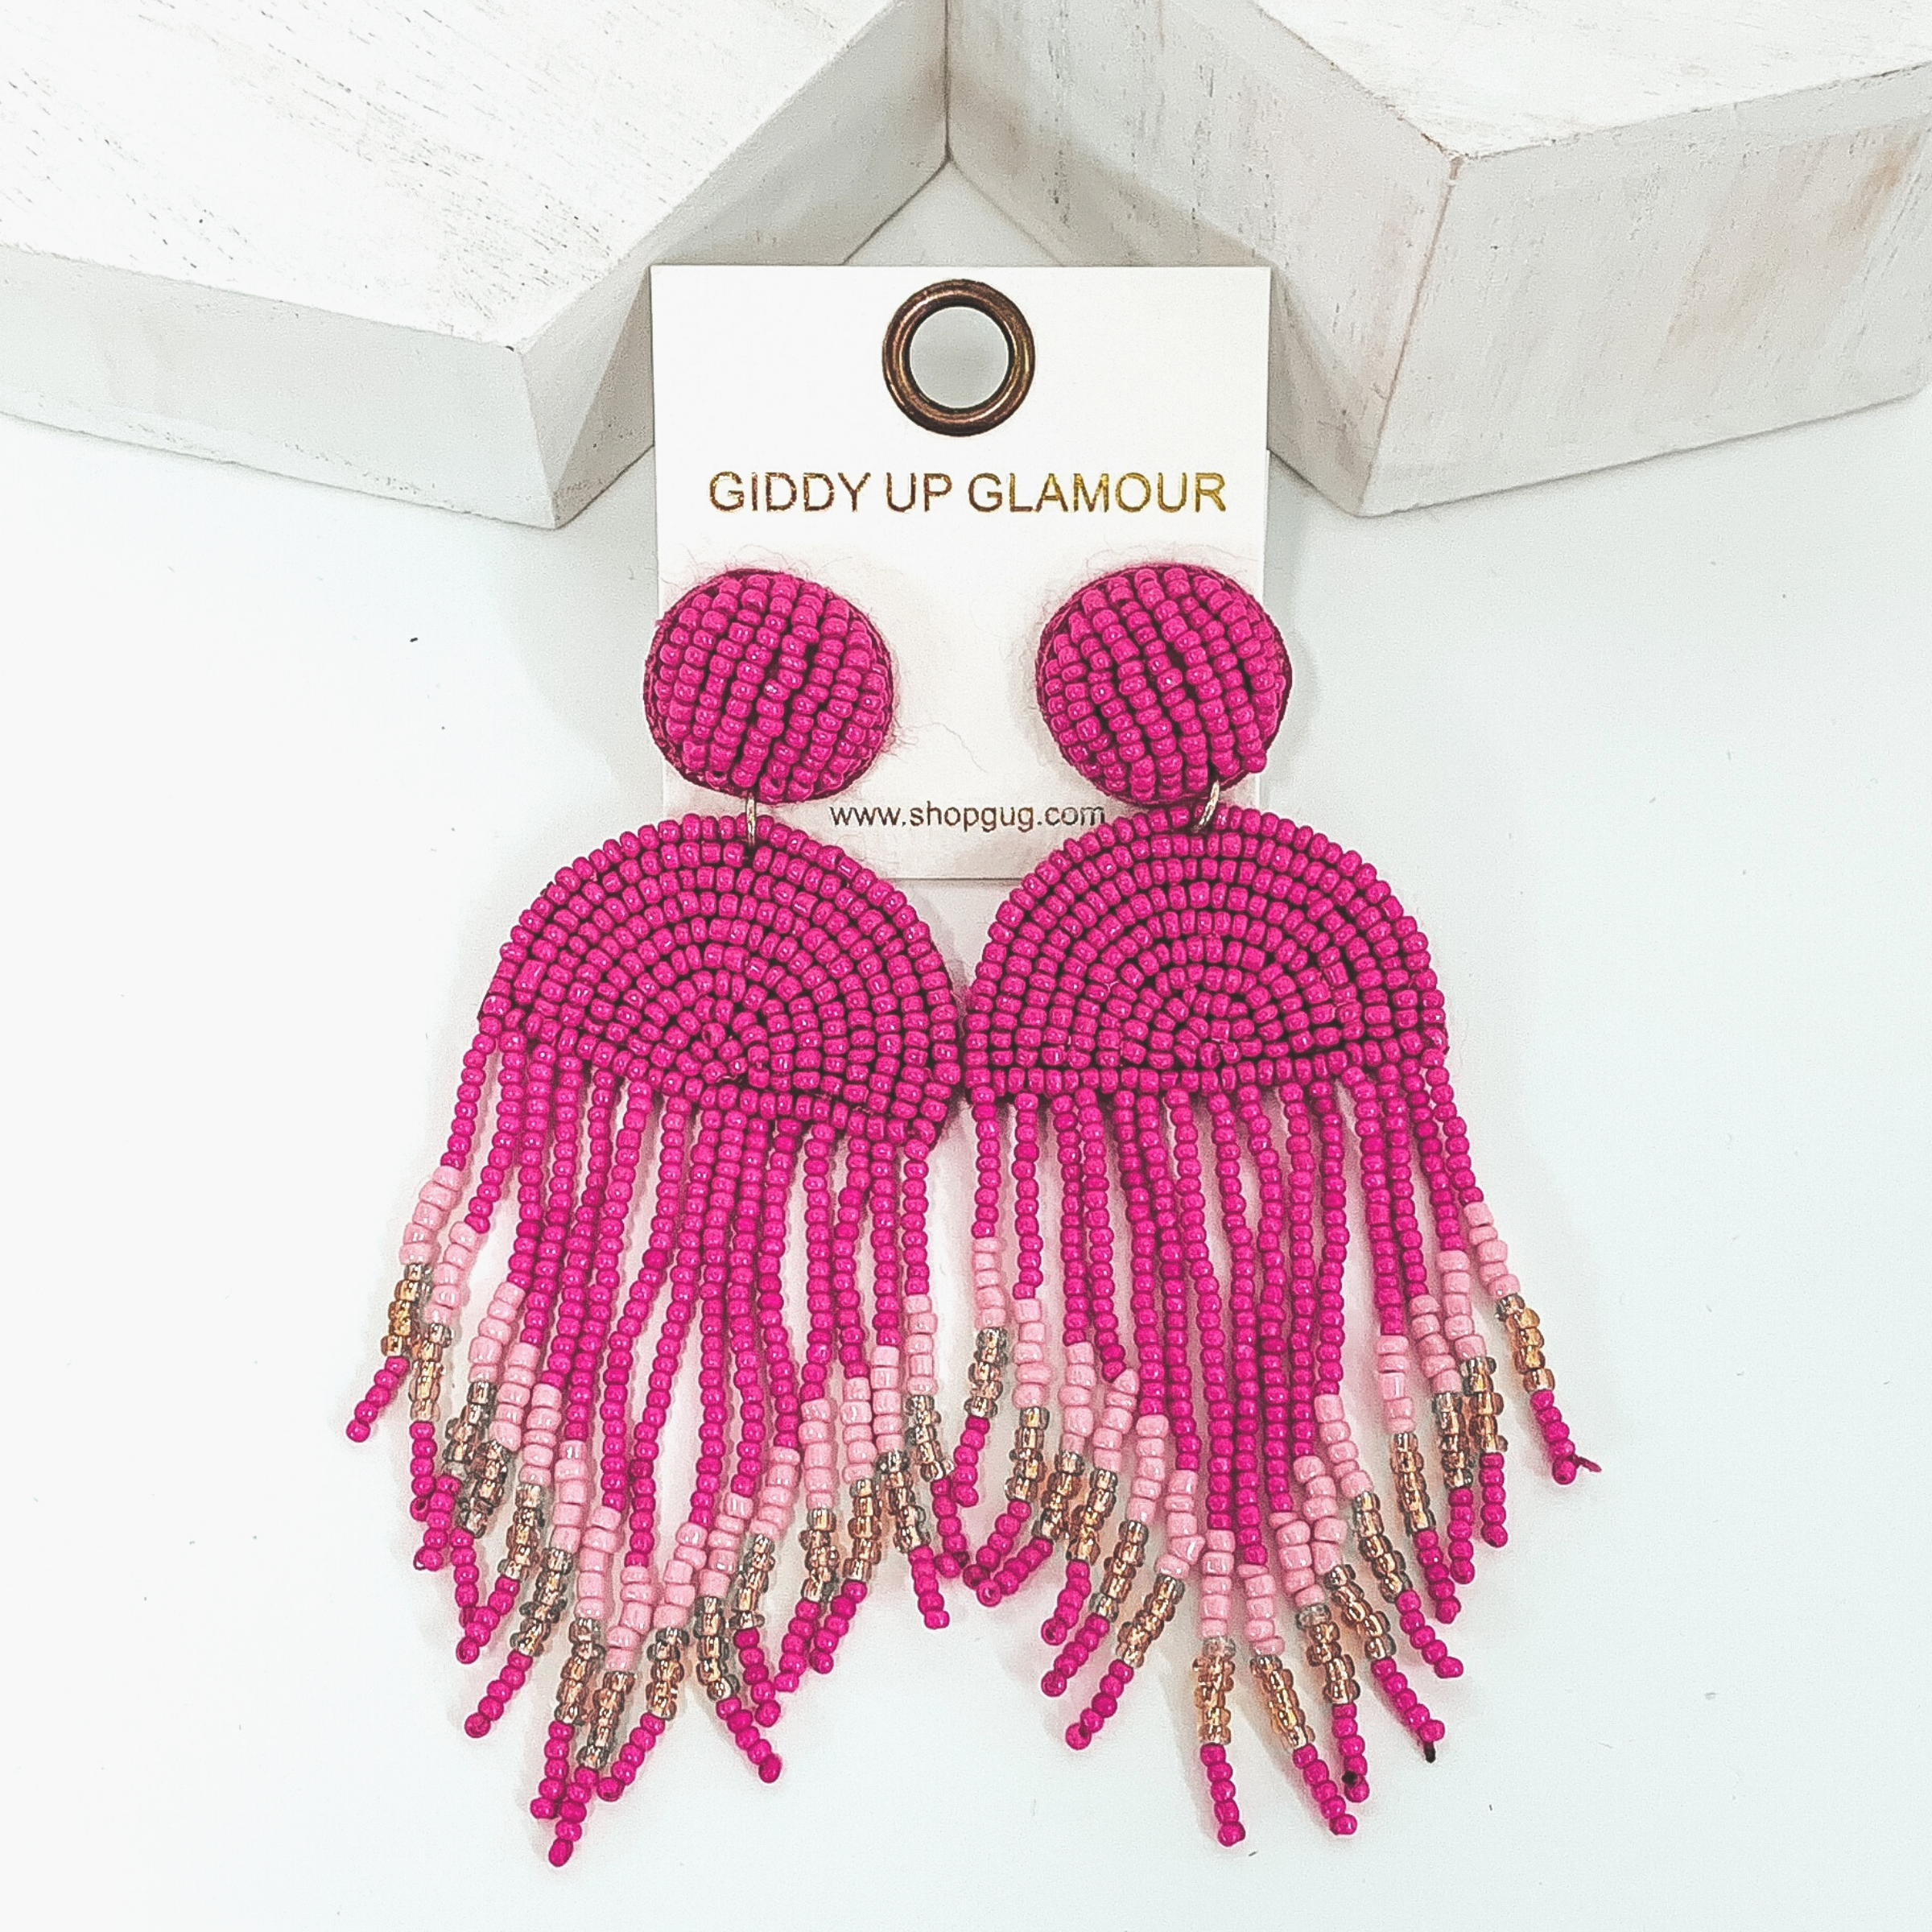 Semi Circle Drop Beaded Earrings with Tassels in Fuchsia - Giddy Up Glamour Boutique